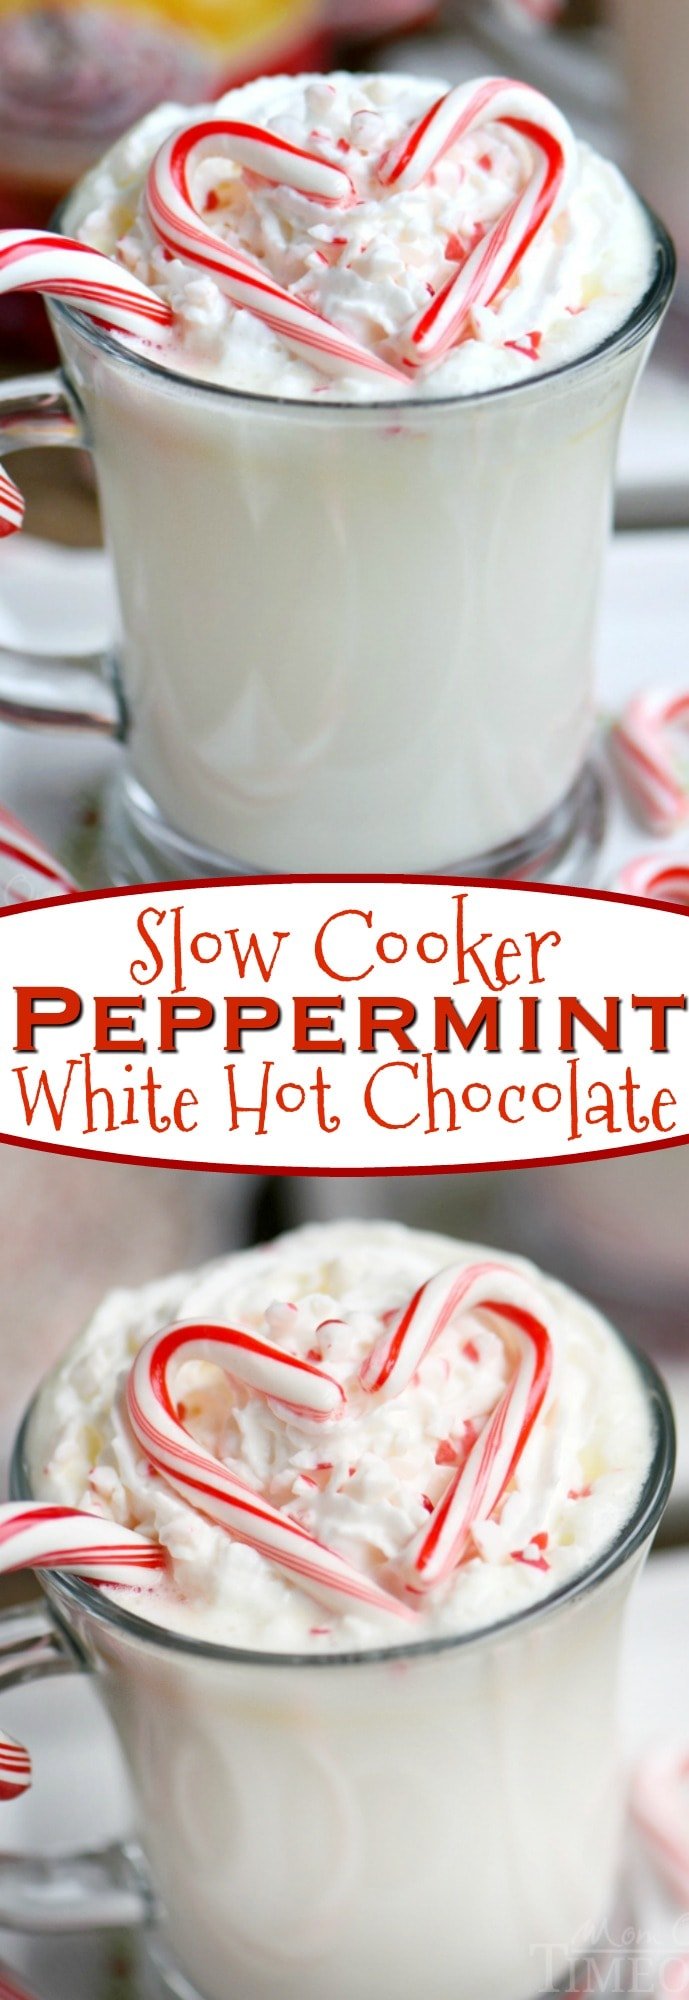 Creamy and decadent Slow Cooker Peppermint White Hot Chocolate! This easy recipe is the perfect way to warm up on a chilly day! Top with whipped cream and crushed candy canes for the ultimate peppermint experience! // Mom On Timeout